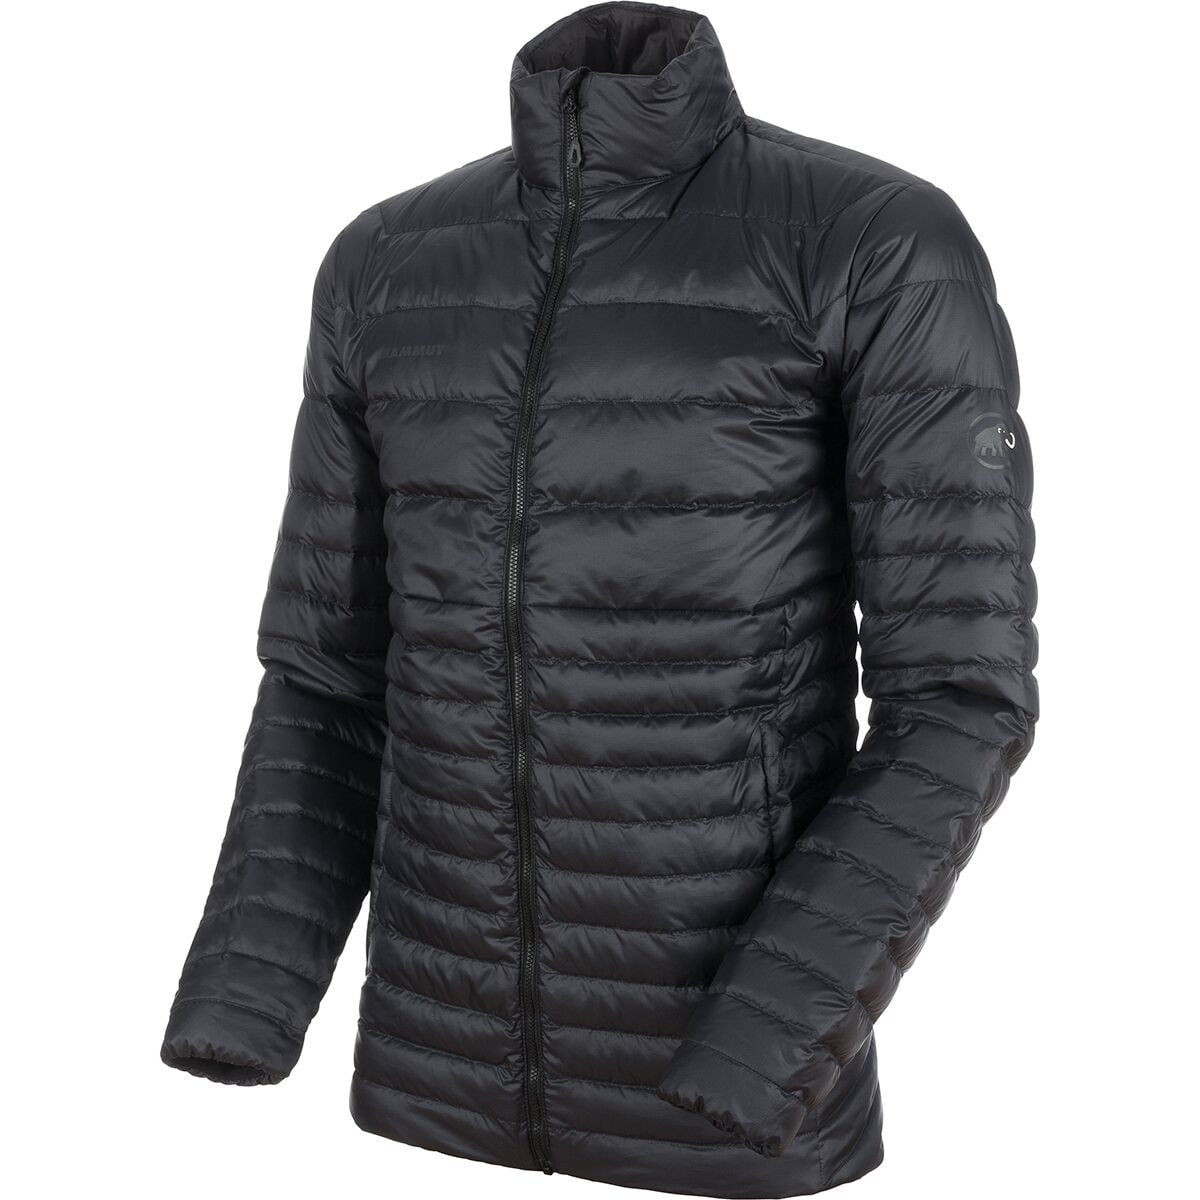 Mammut Convey IN Jacket - Men's - Clothing